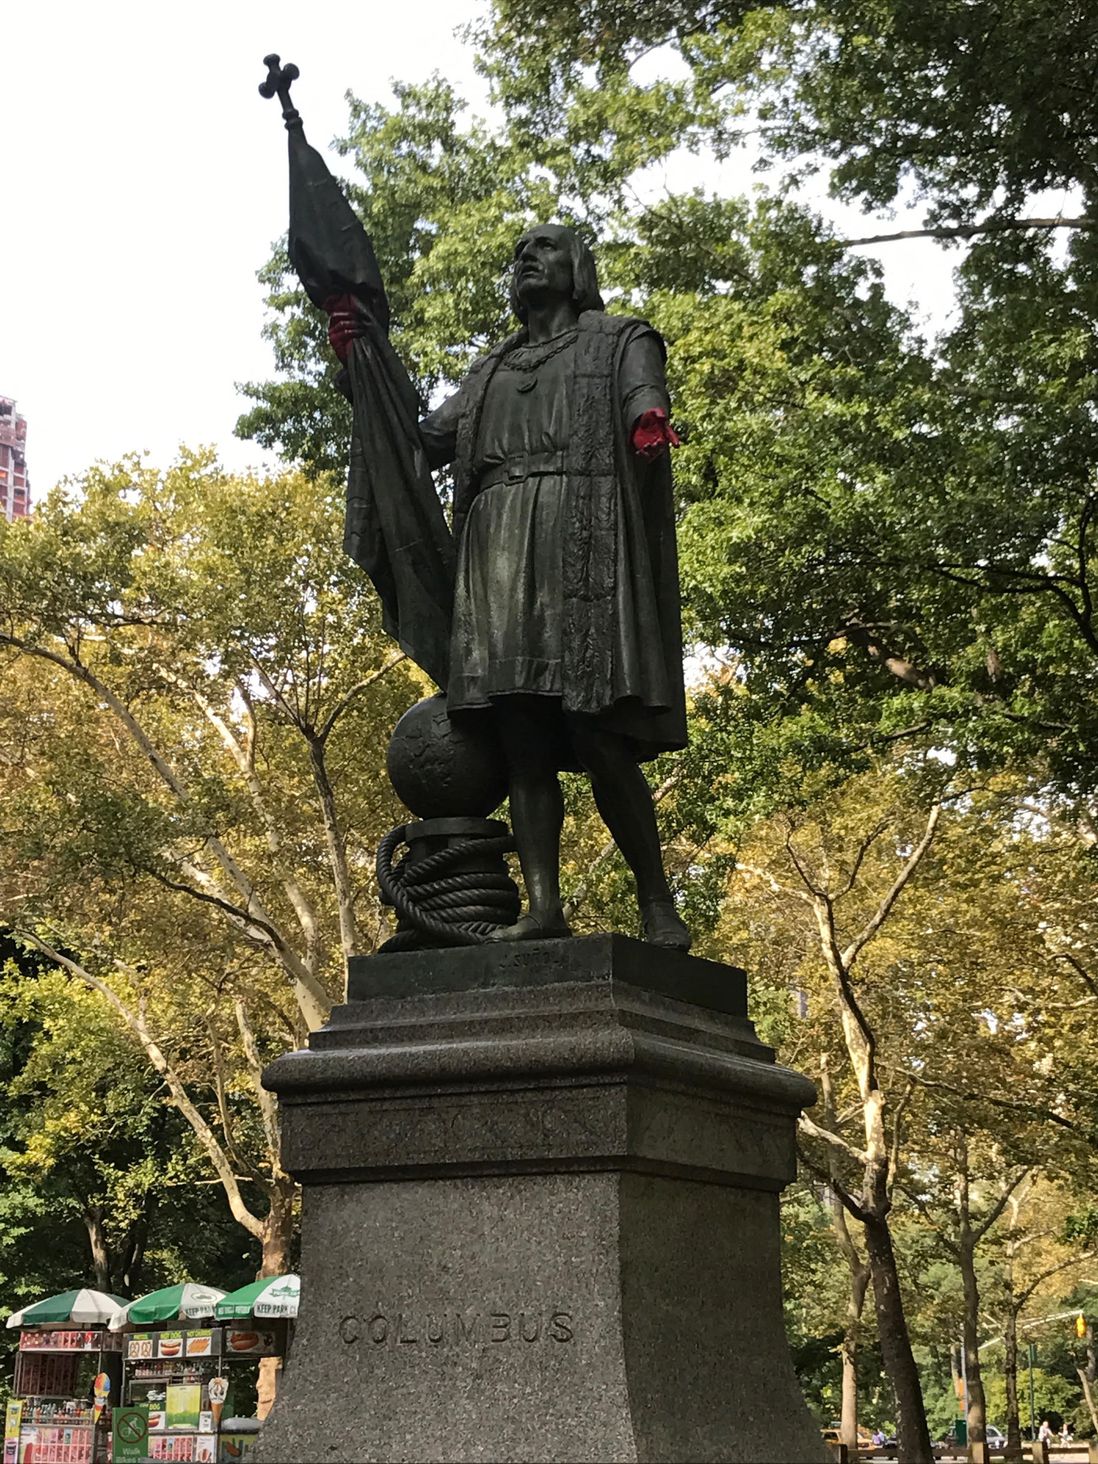 The paint remains on the statue's hands, but the graffiti was removed from the base (Danielle Barnes / DNAinfo)